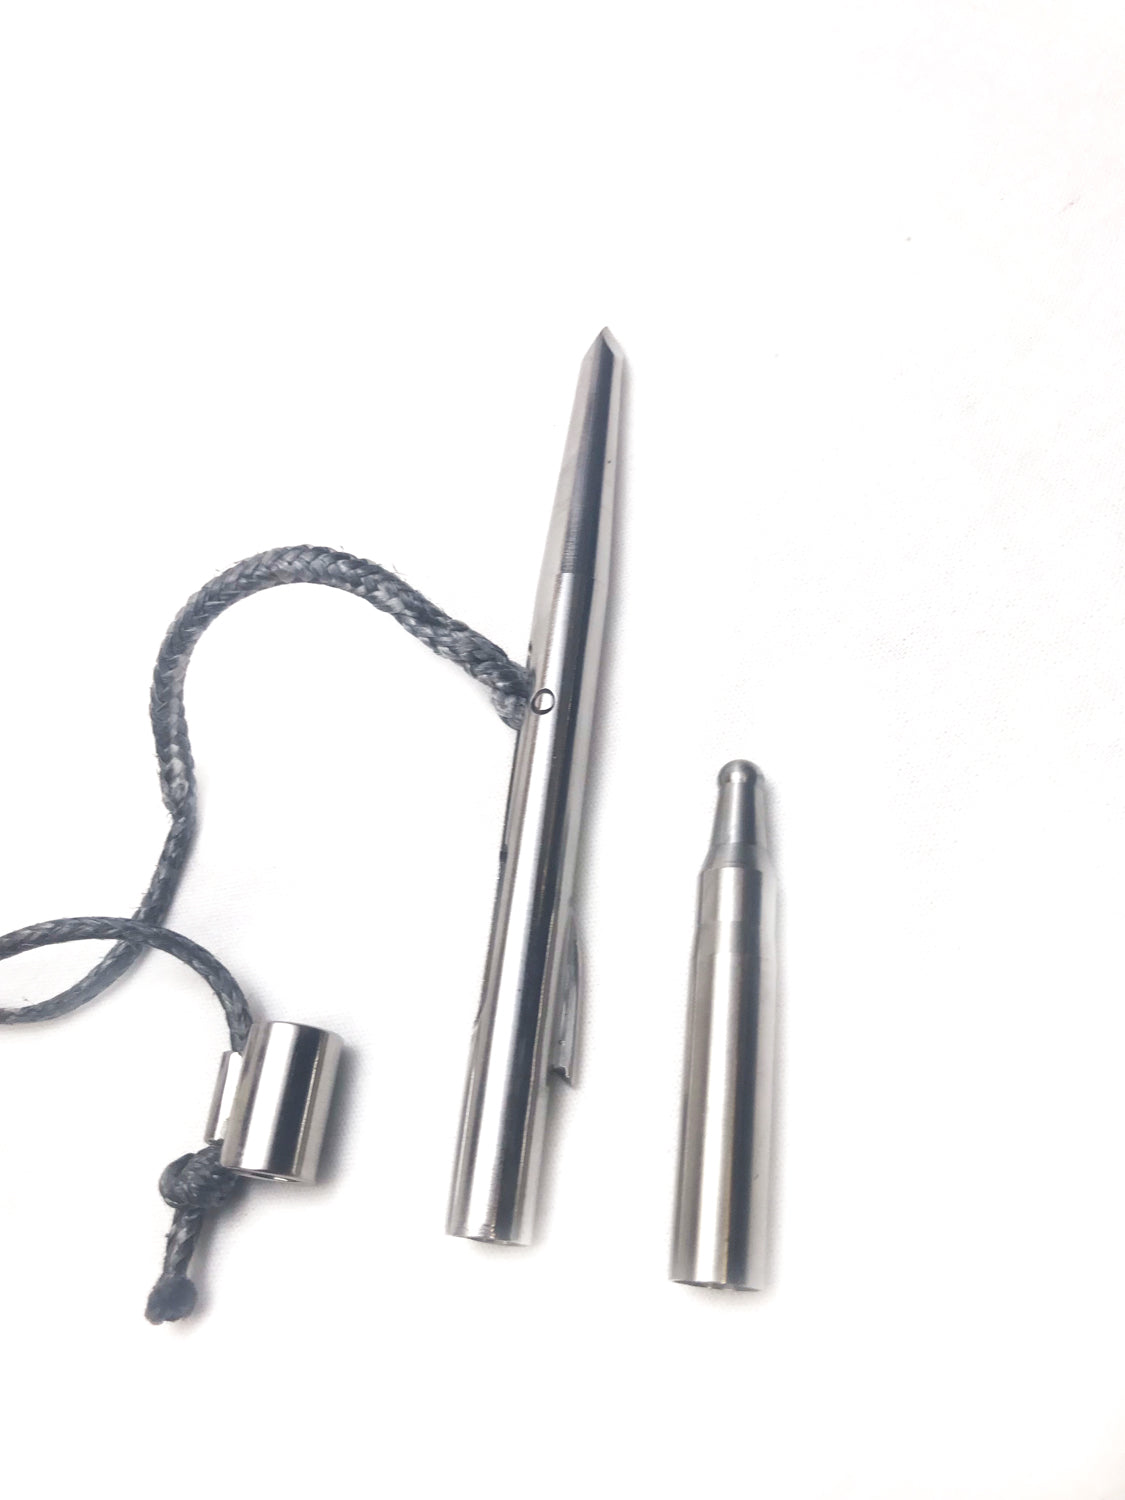 Slip tip with Cord for Spearfishing Spear Gun with 6 mm Threads